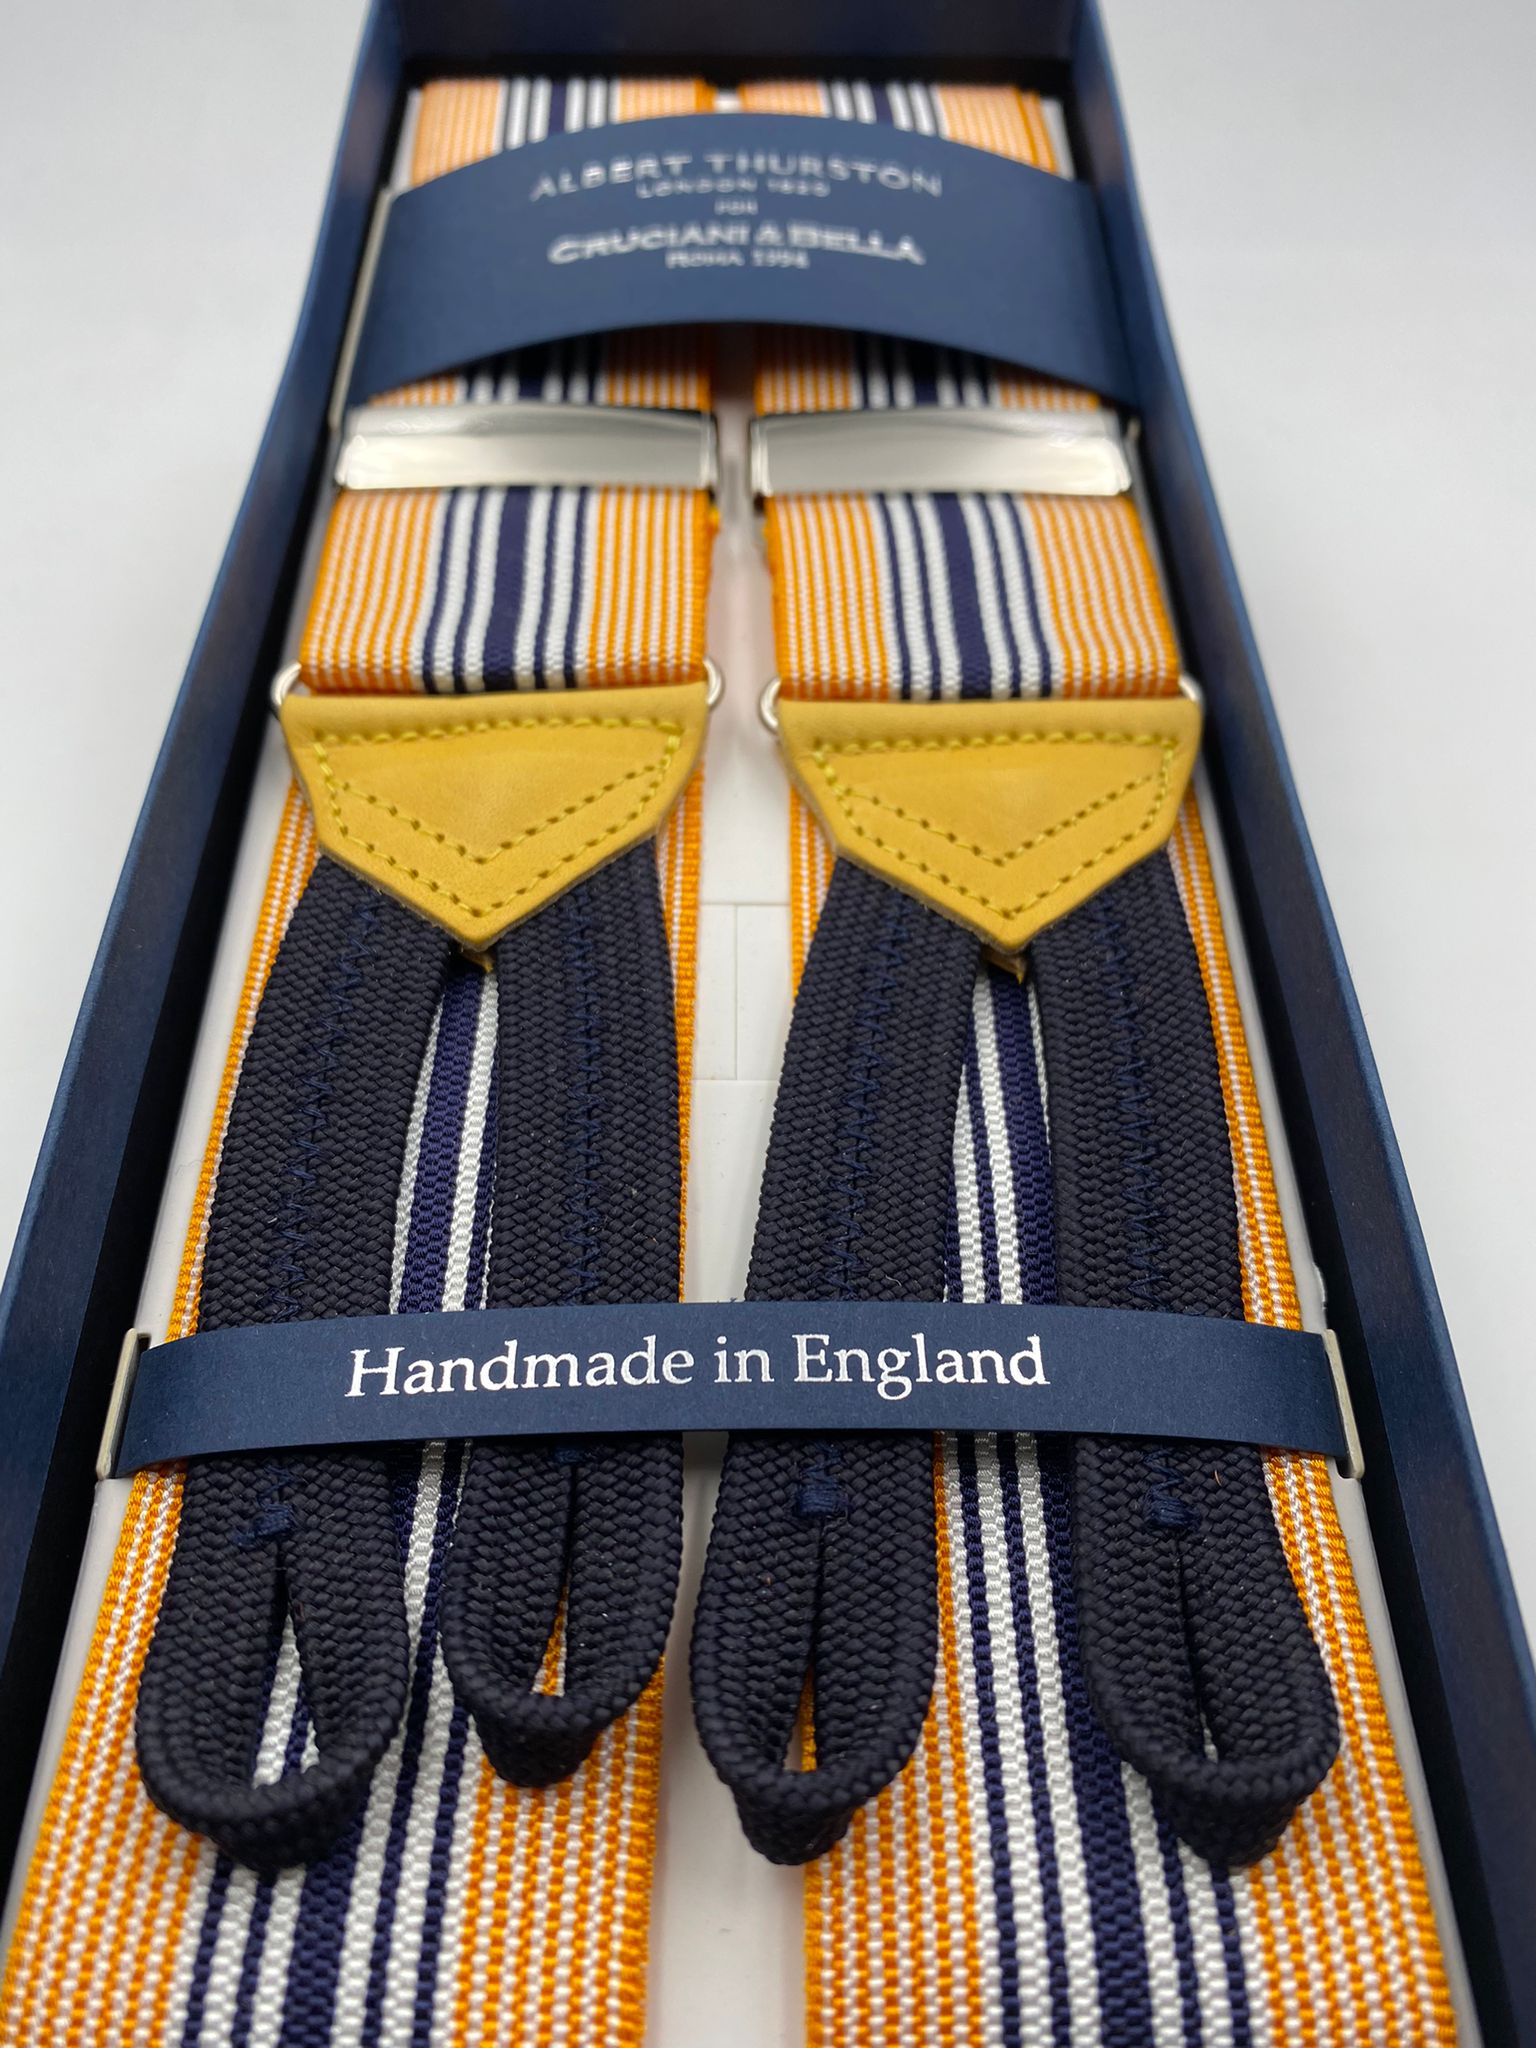 Albert Thurston for Cruciani & Bella Made in England Adjustable Sizing 40 mm Woven Barathea  Orange, Blue and White Stripes Braces Braid ends Y-Shaped Nickel Fittings Size: XL #5653